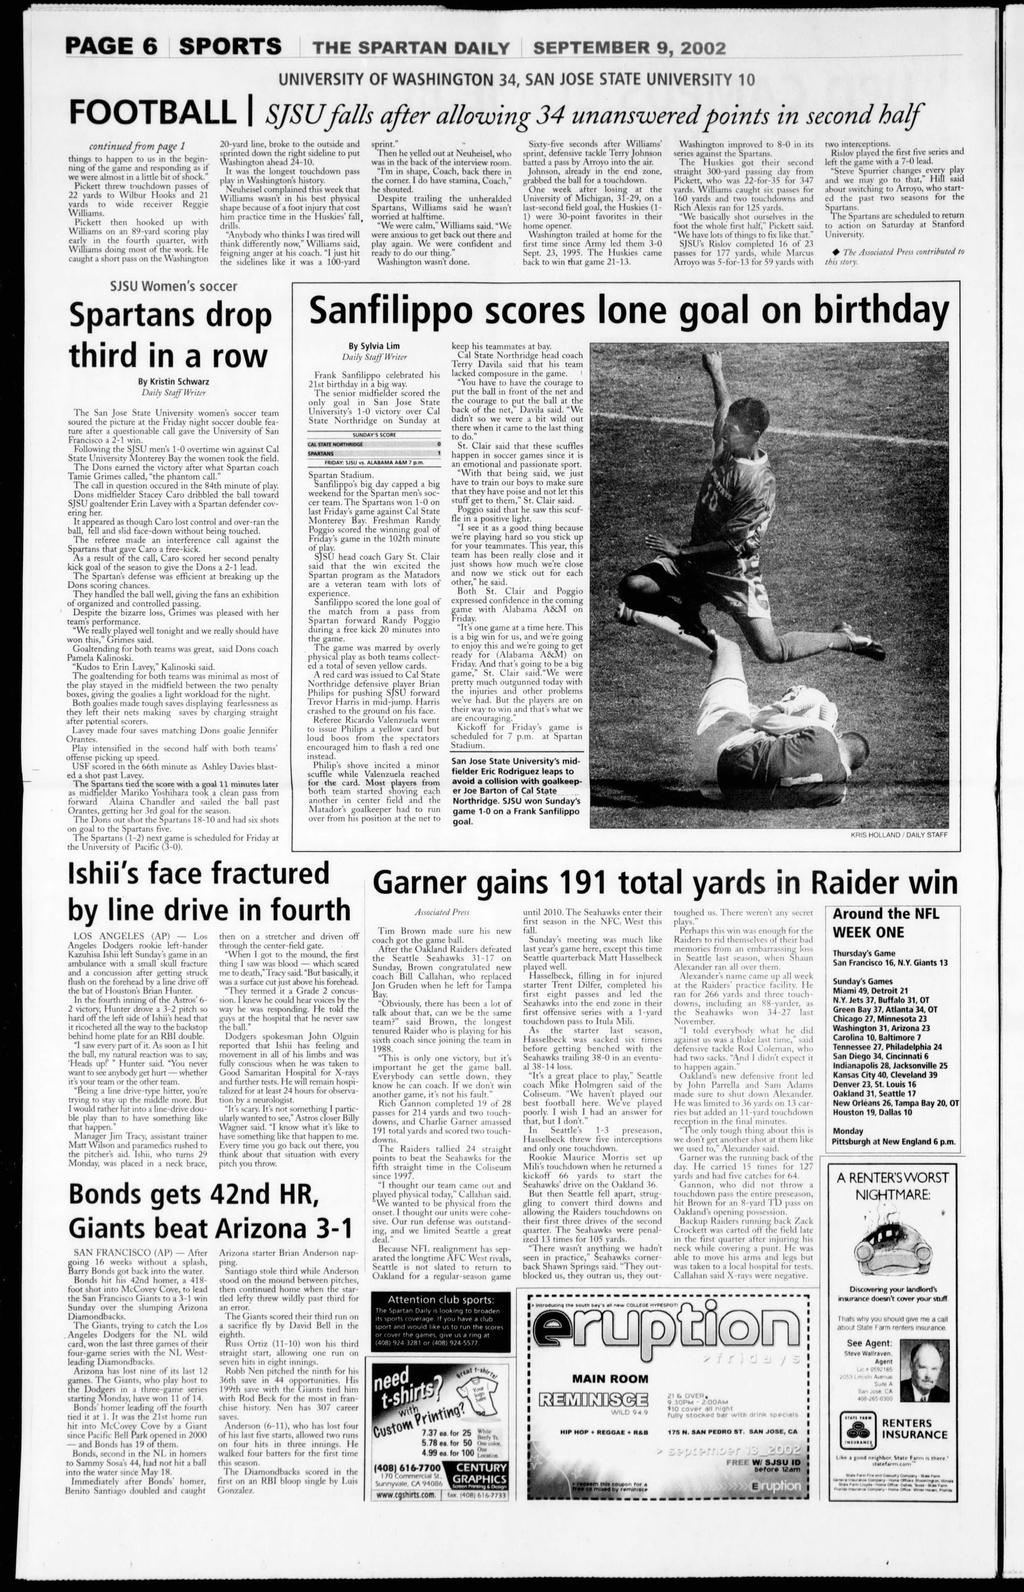 PAGE 6 SPORTS SEPTEMBER 9, 2002 UNIVERSITY OF WASHINGTON 34, SAN JOSE STATE UNIVERSITY 0 FOOTBALL I continuedfom page I things happen us in the beginning of the game esponding as if we wee almost in